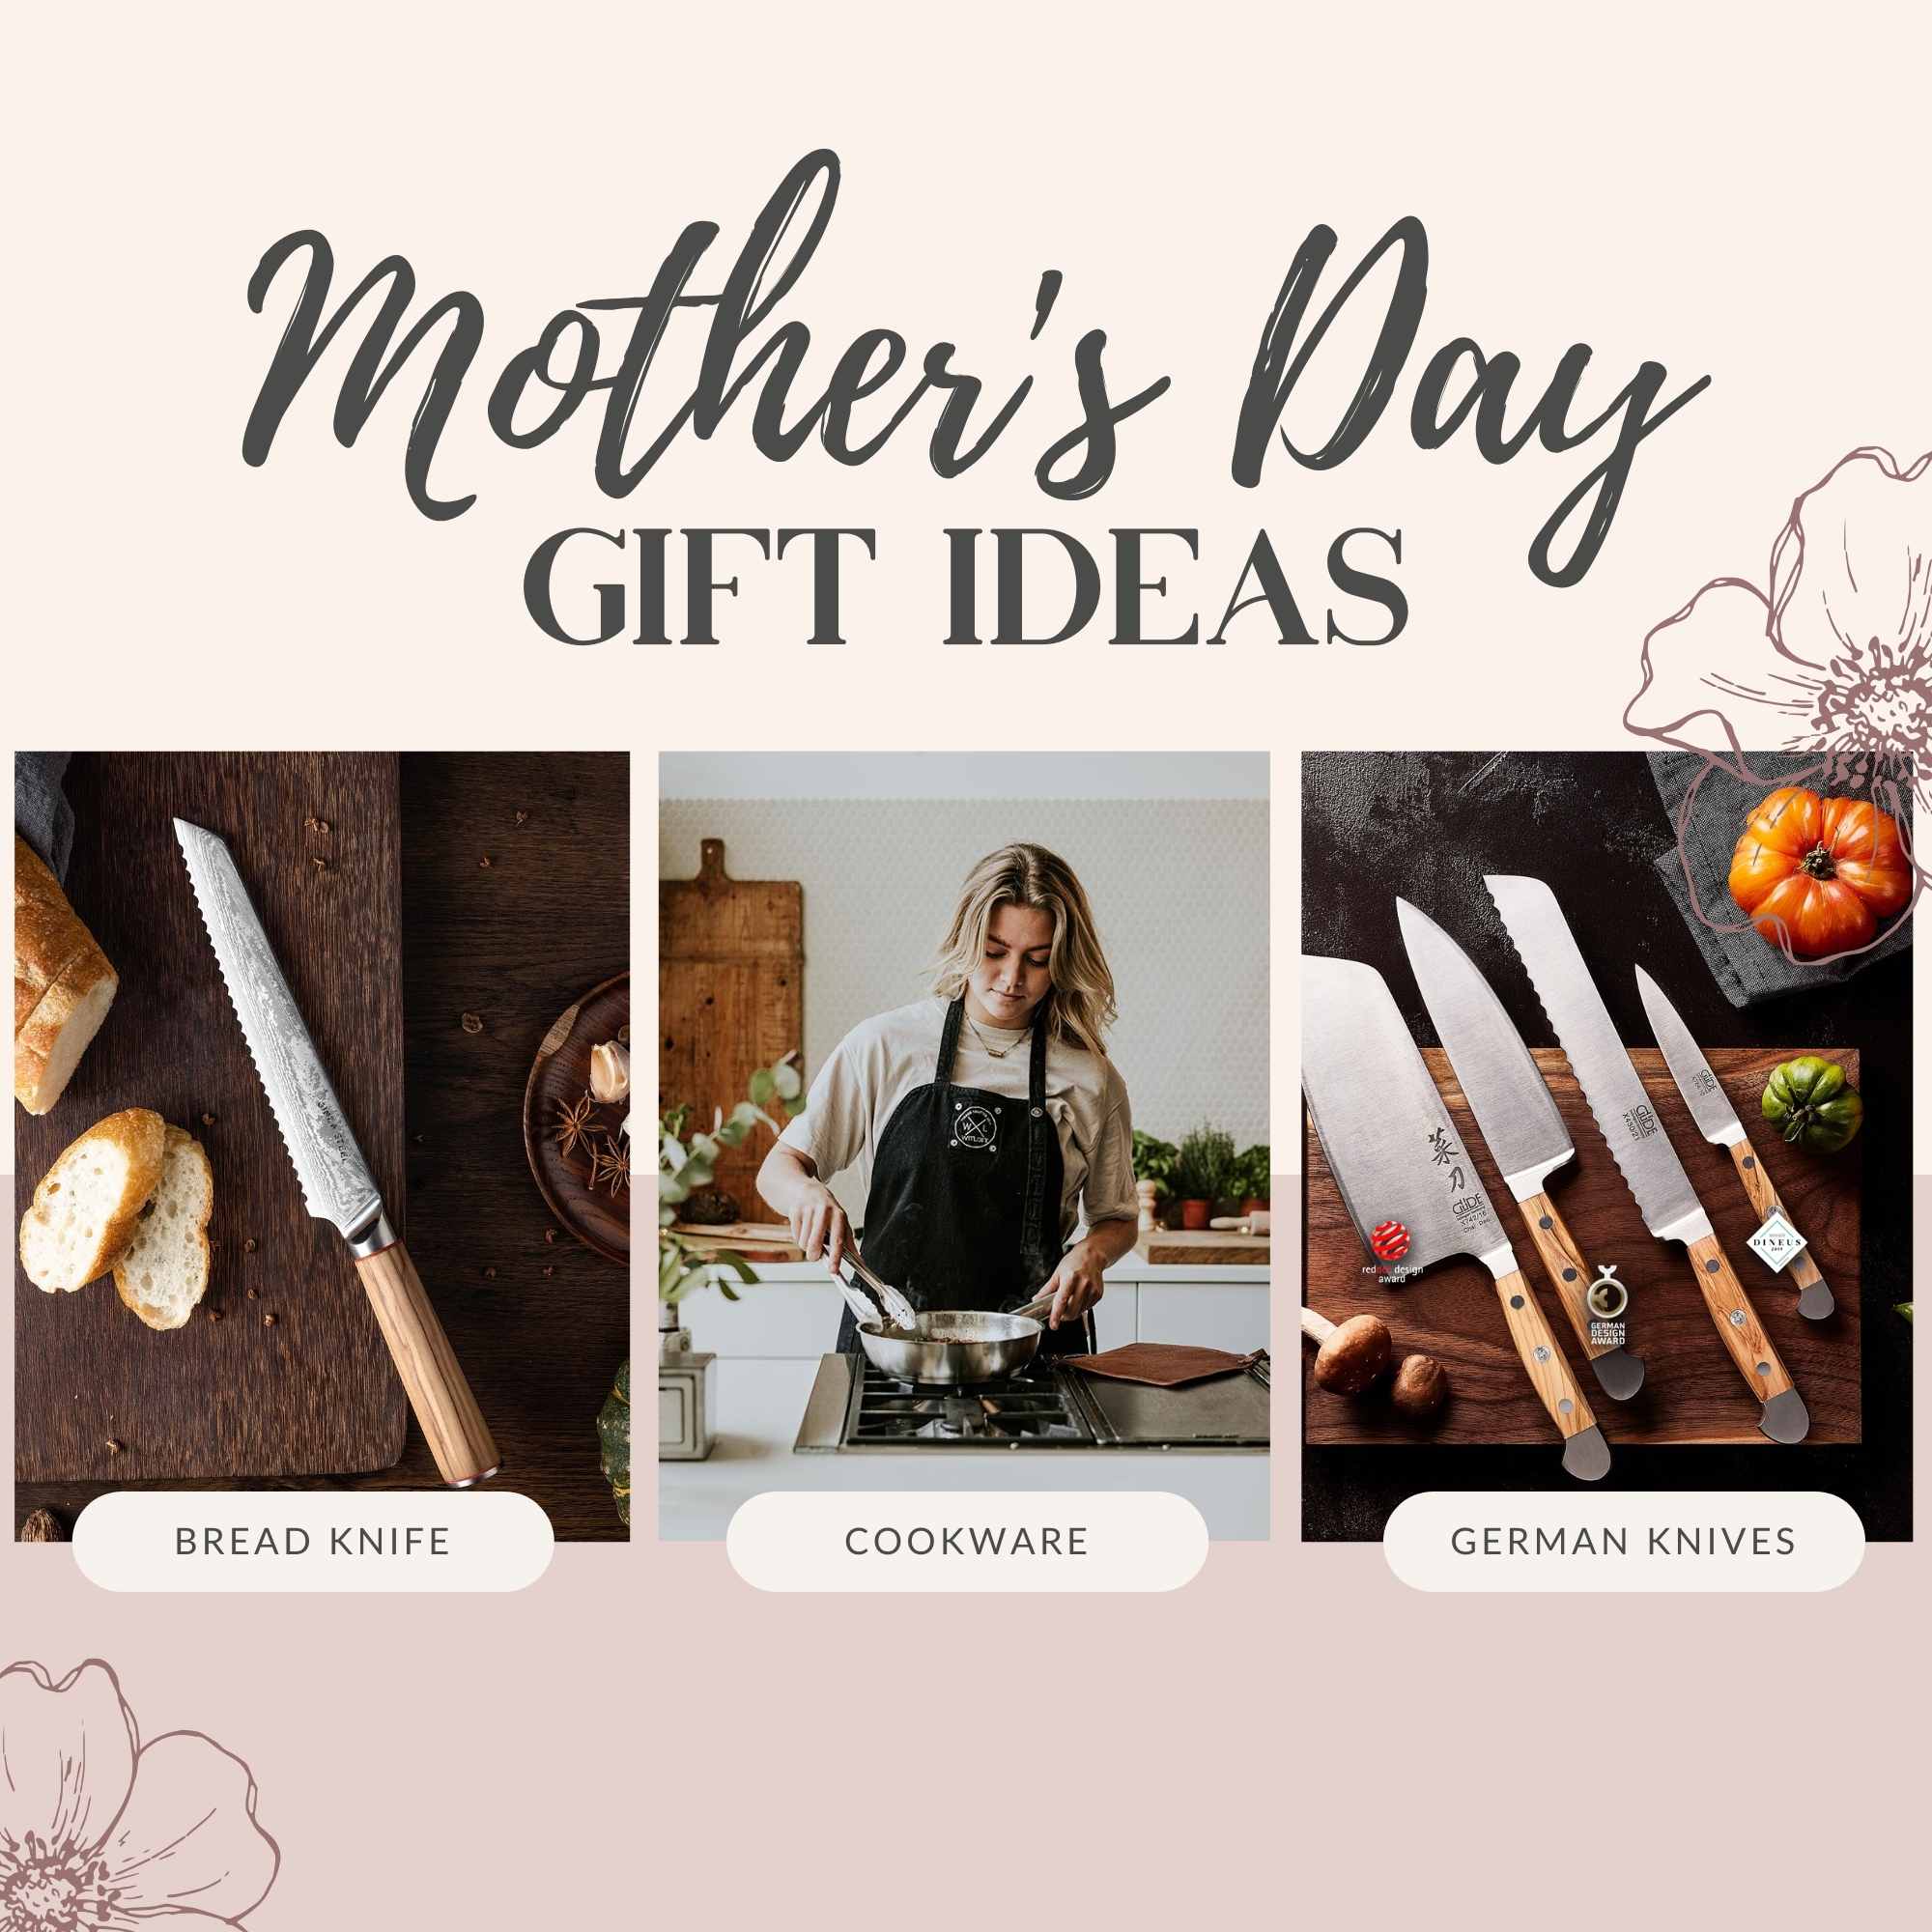 Spoil Mom with Thoughtful Mother's Day Gifts from JapanChefKnife.com